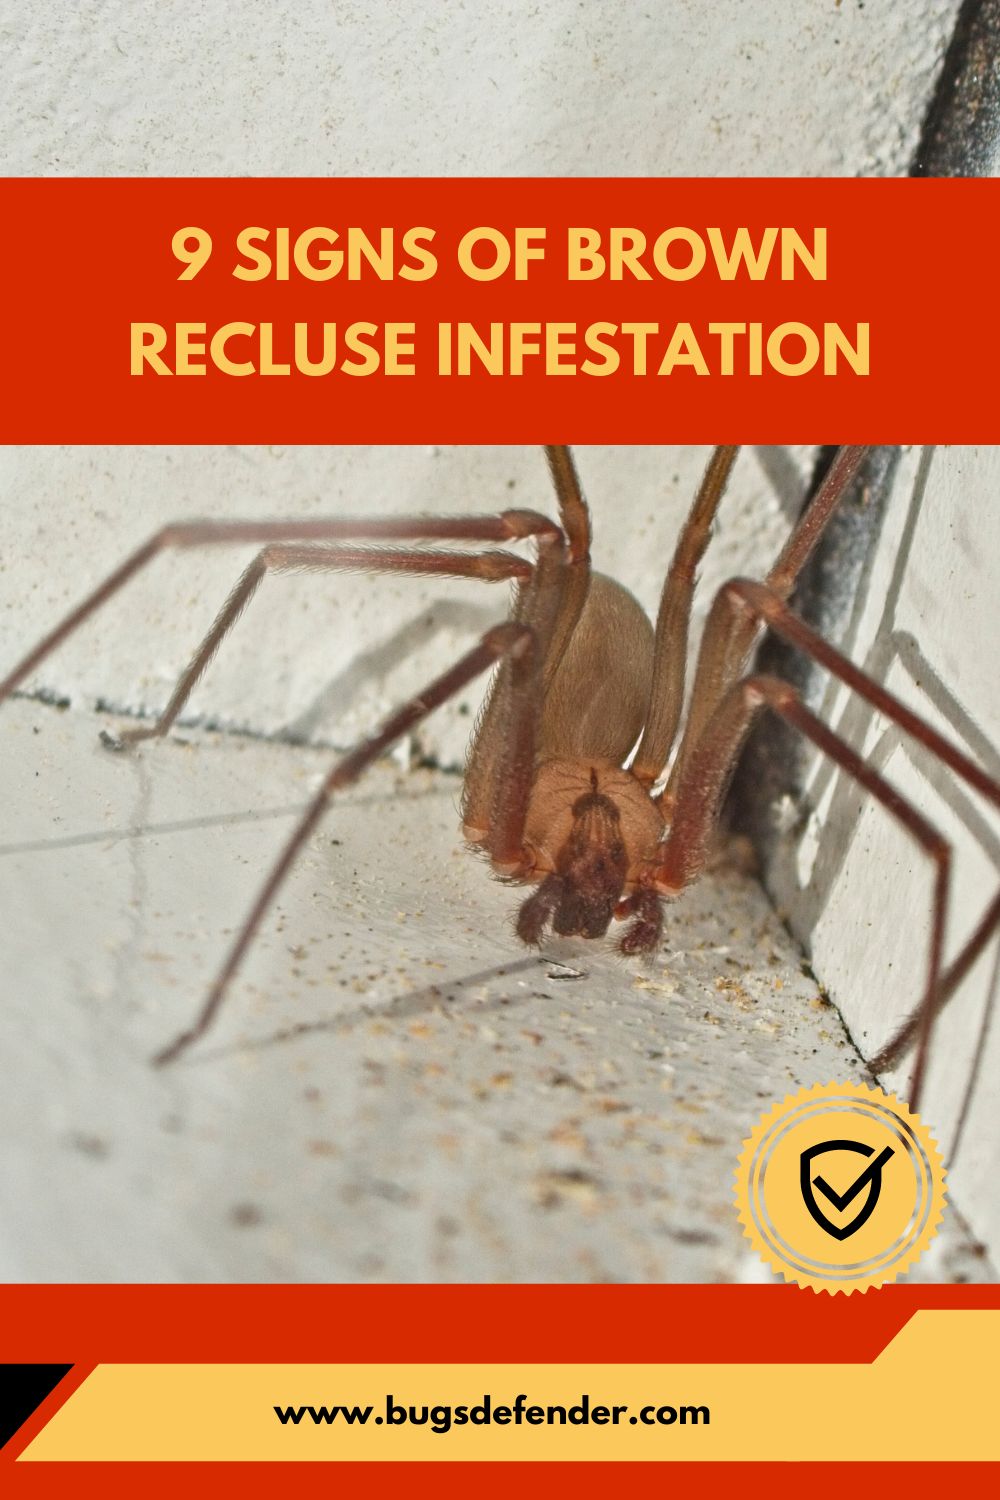 9 Signs of Brown Recluse Infestation pin 2